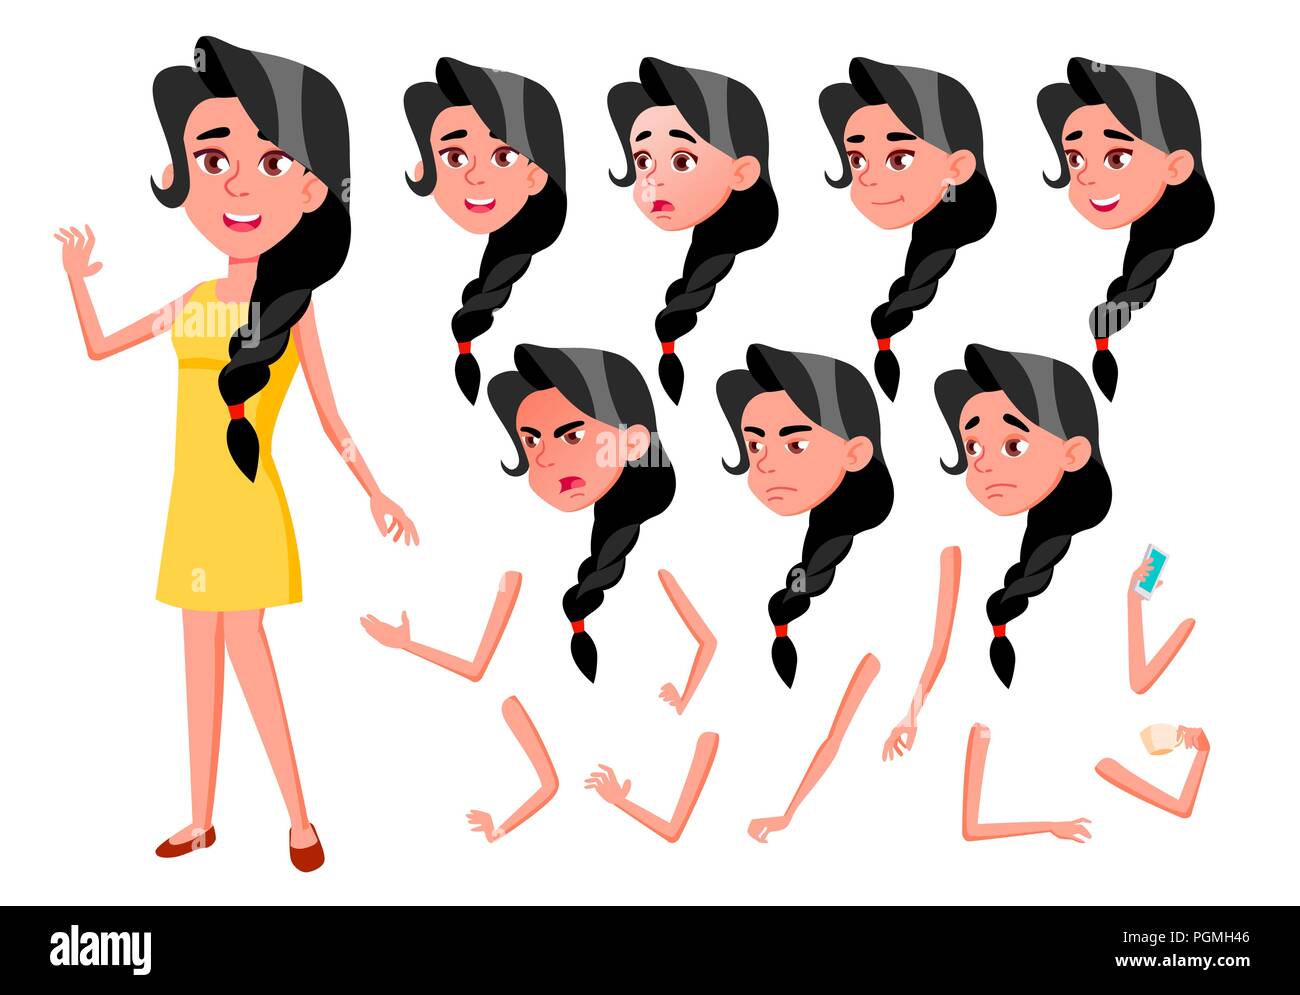 Woman character animation kit in various position Vector Image